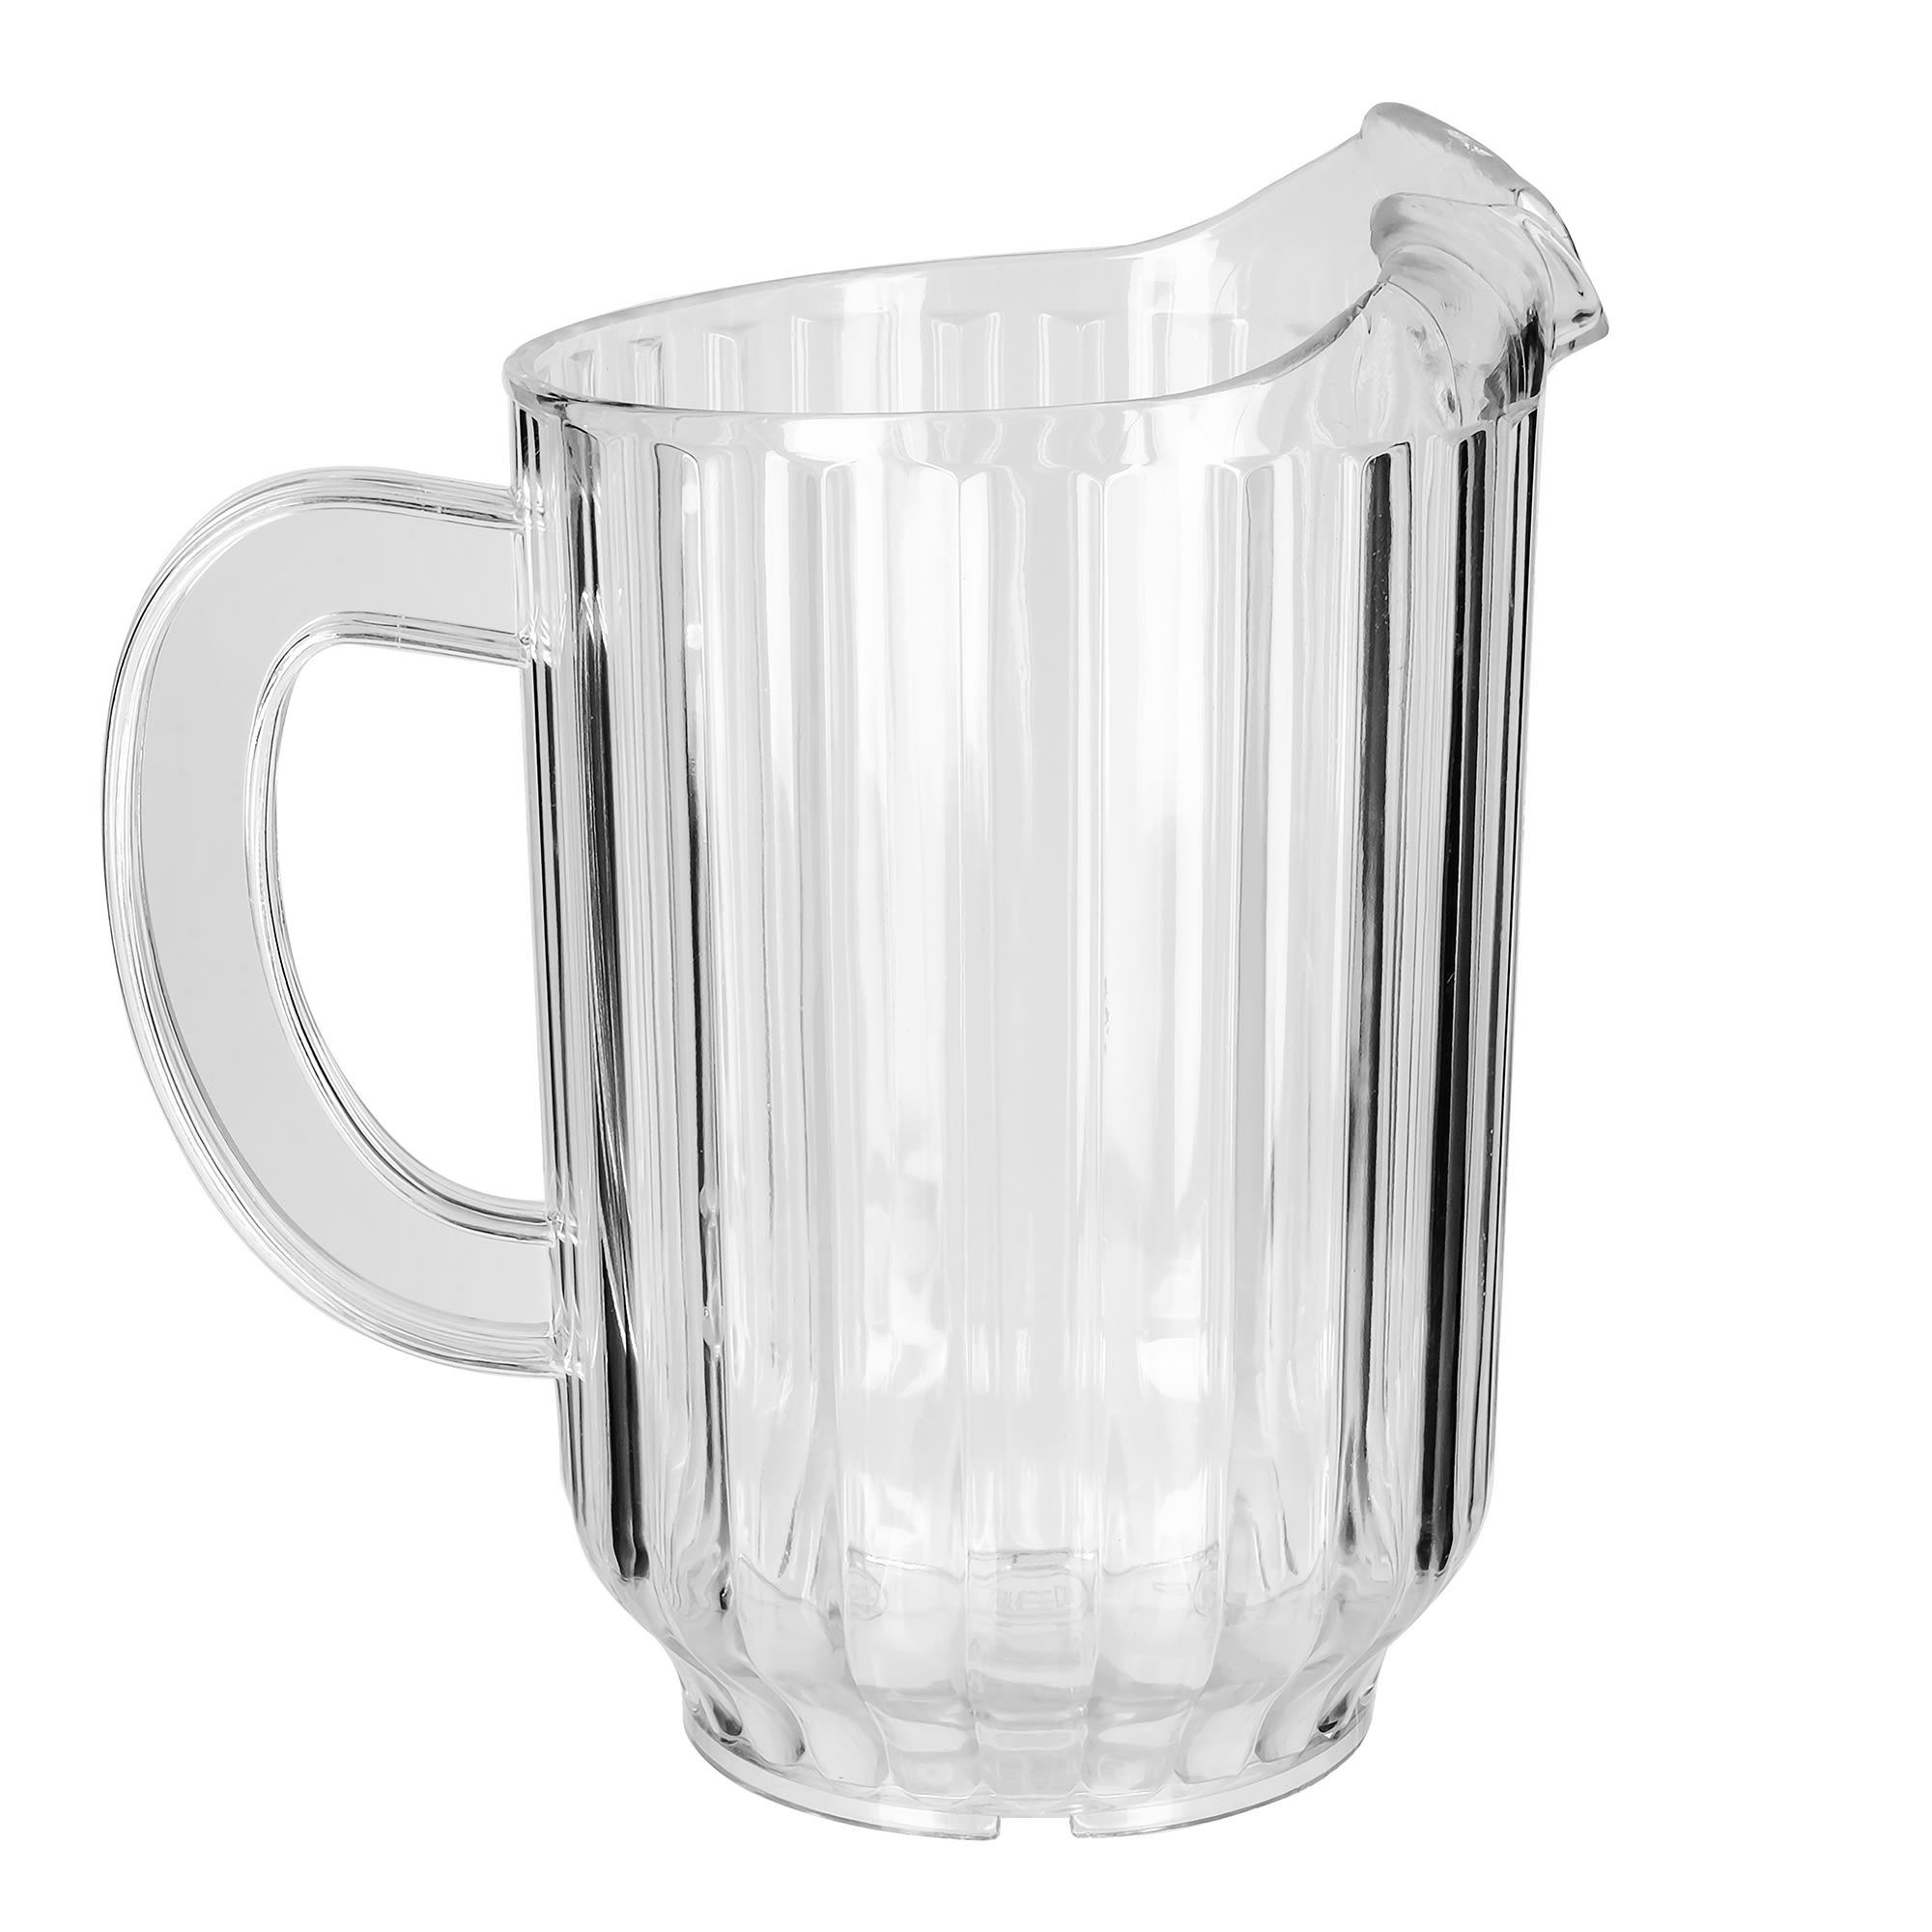 [3 PACK] 60 oz Heavy Duty Crystal Clear Plastic Beverage Pitcher - Break  Resistant Beverage Carafe - Great for Restaurants and Catering - Serveware